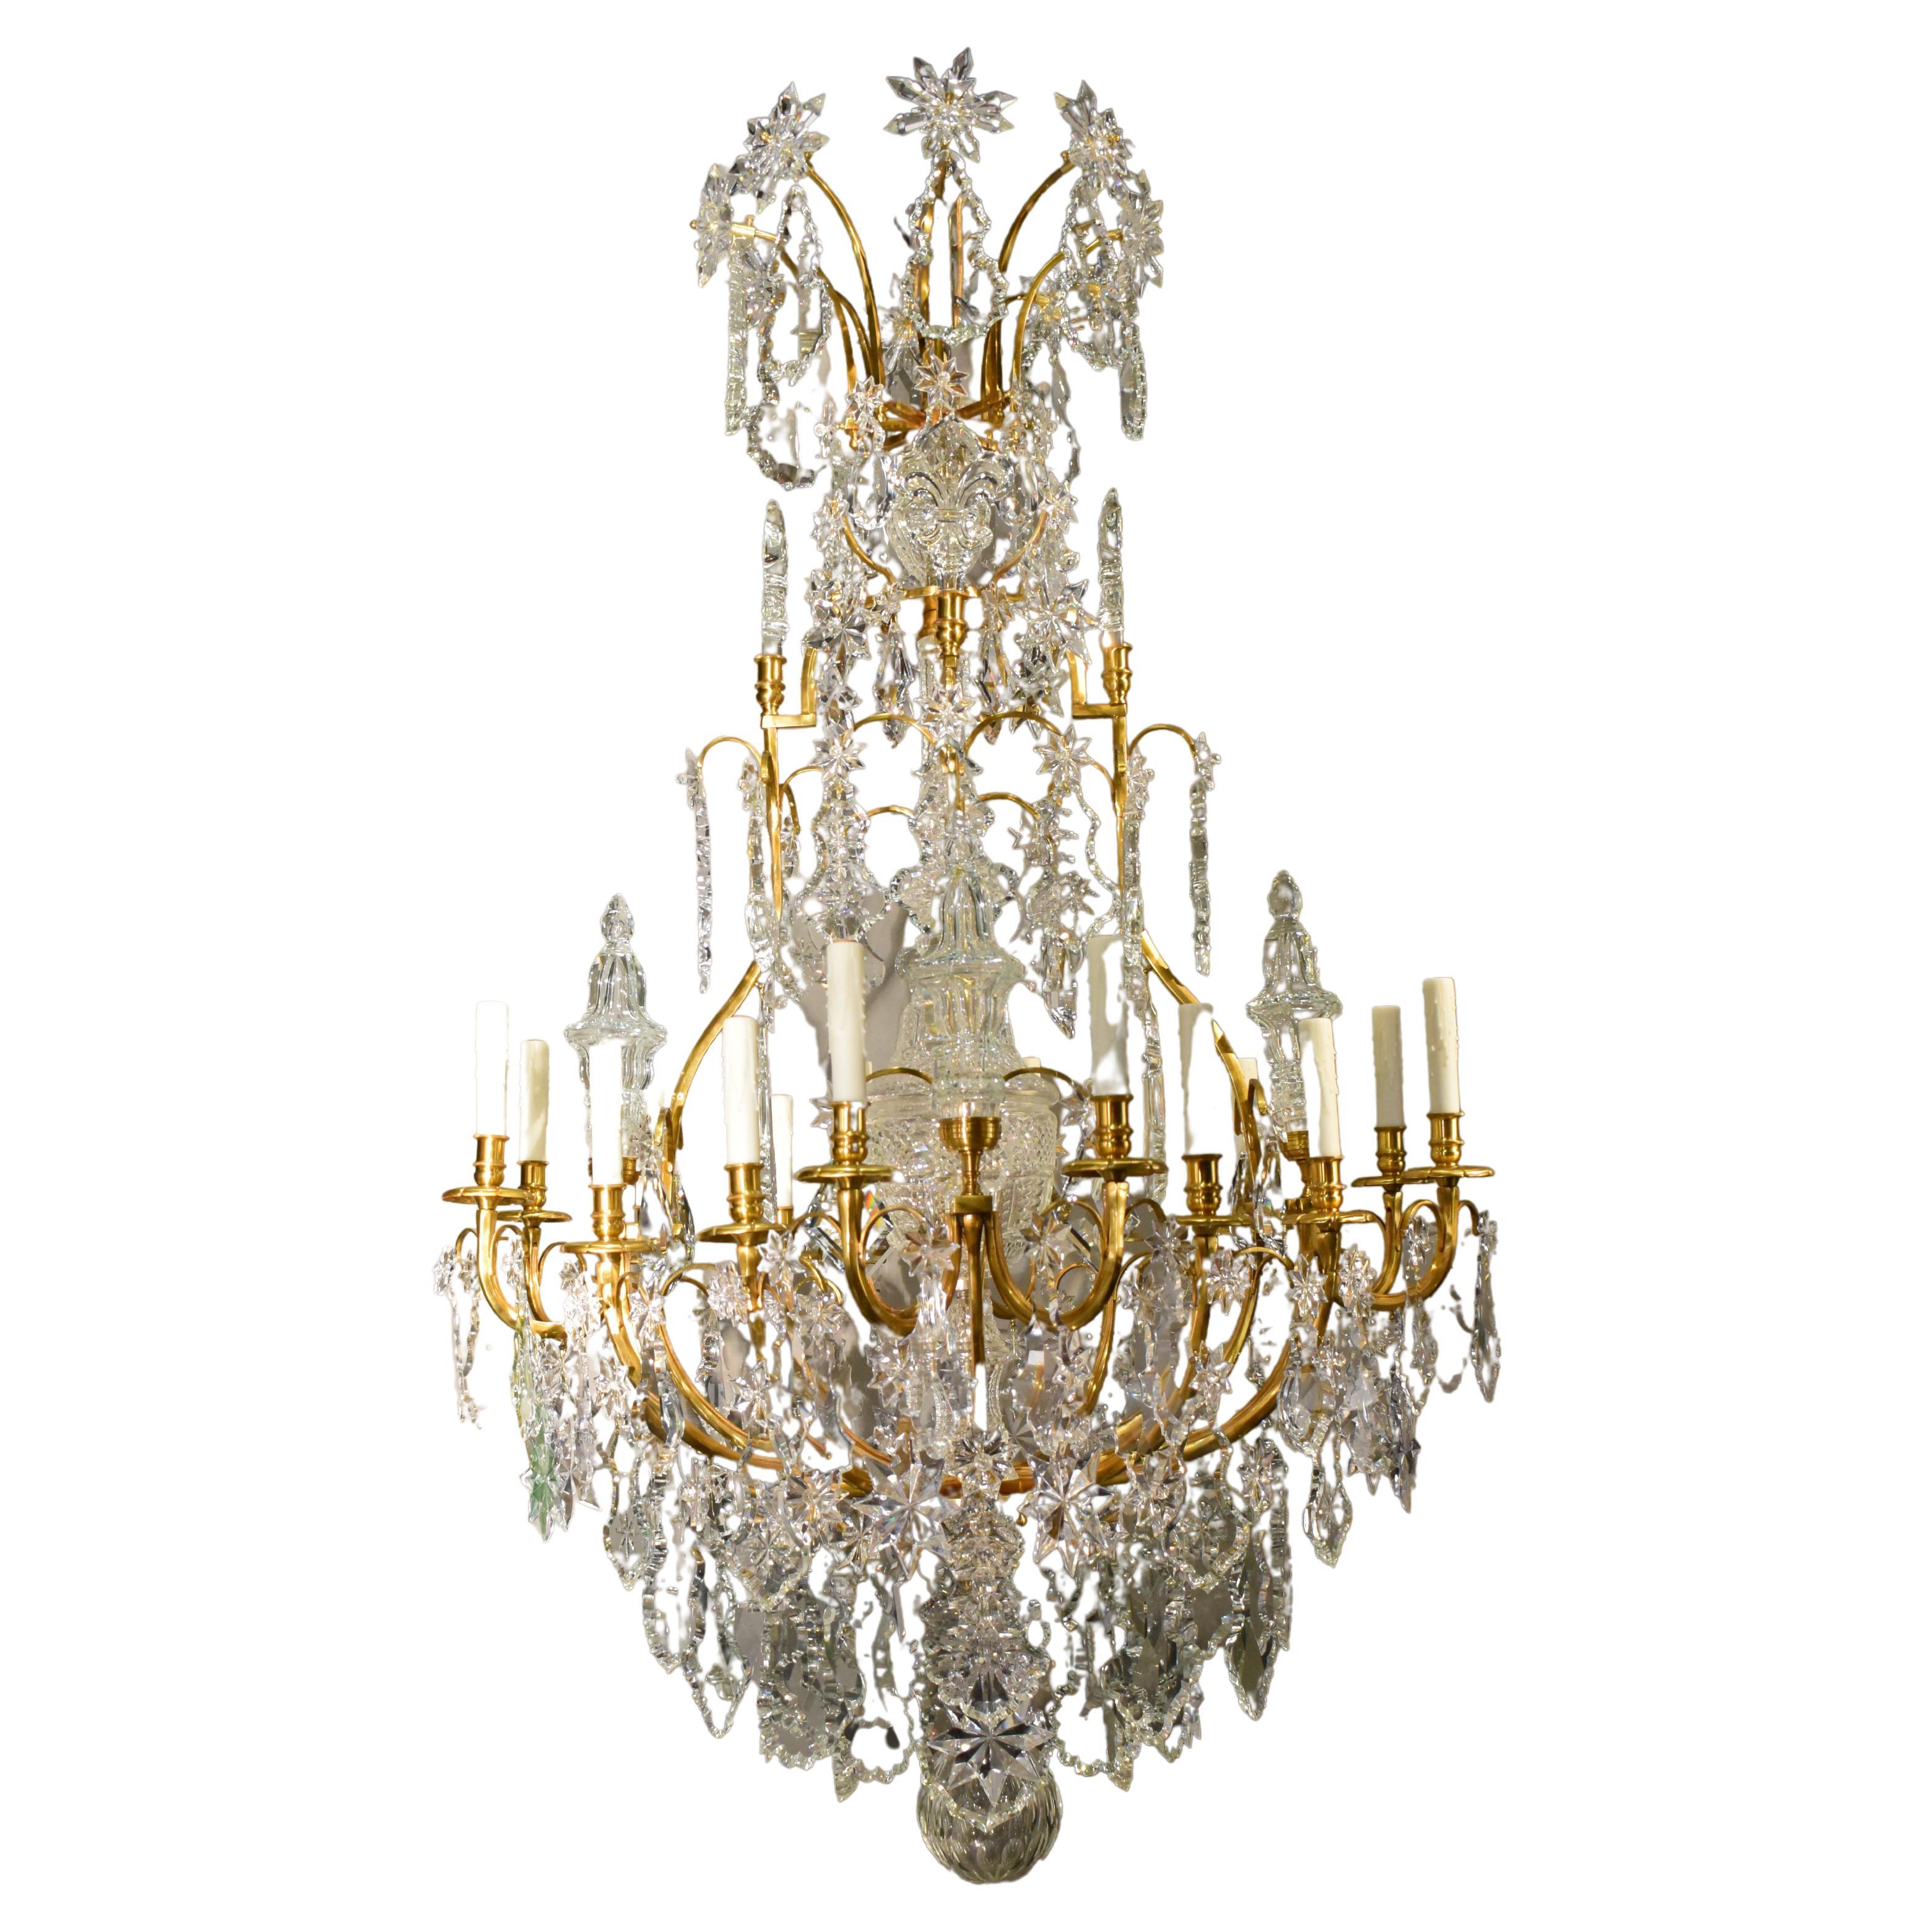 Very Fine Gilt Bronze & Crystal Chandelier by Baccarat